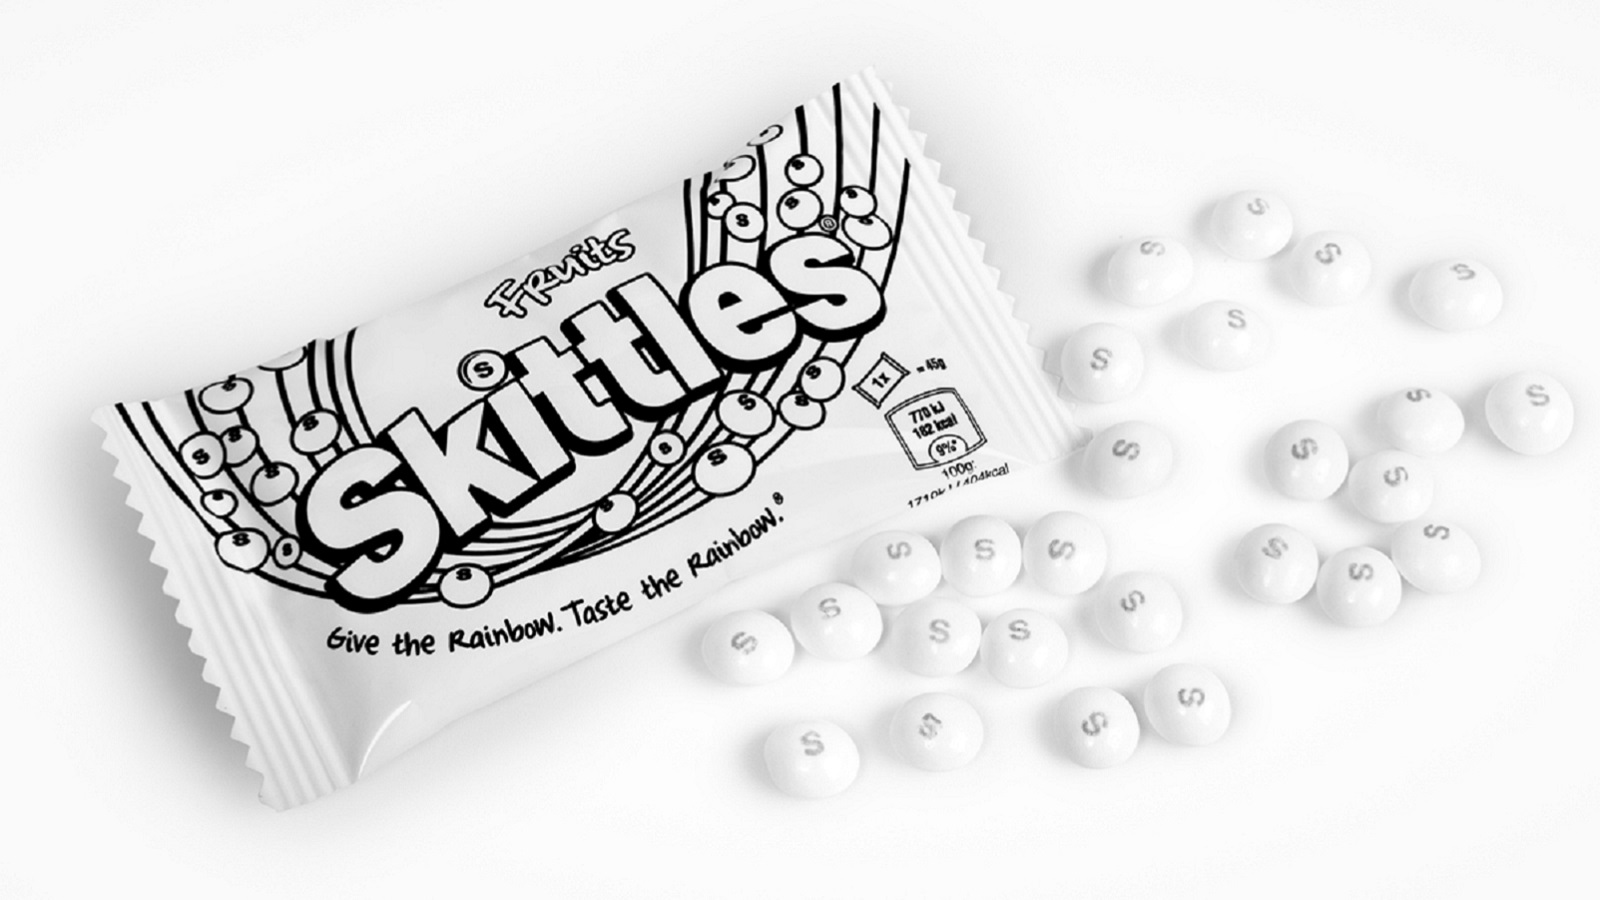 Skittles without the Rainbow?